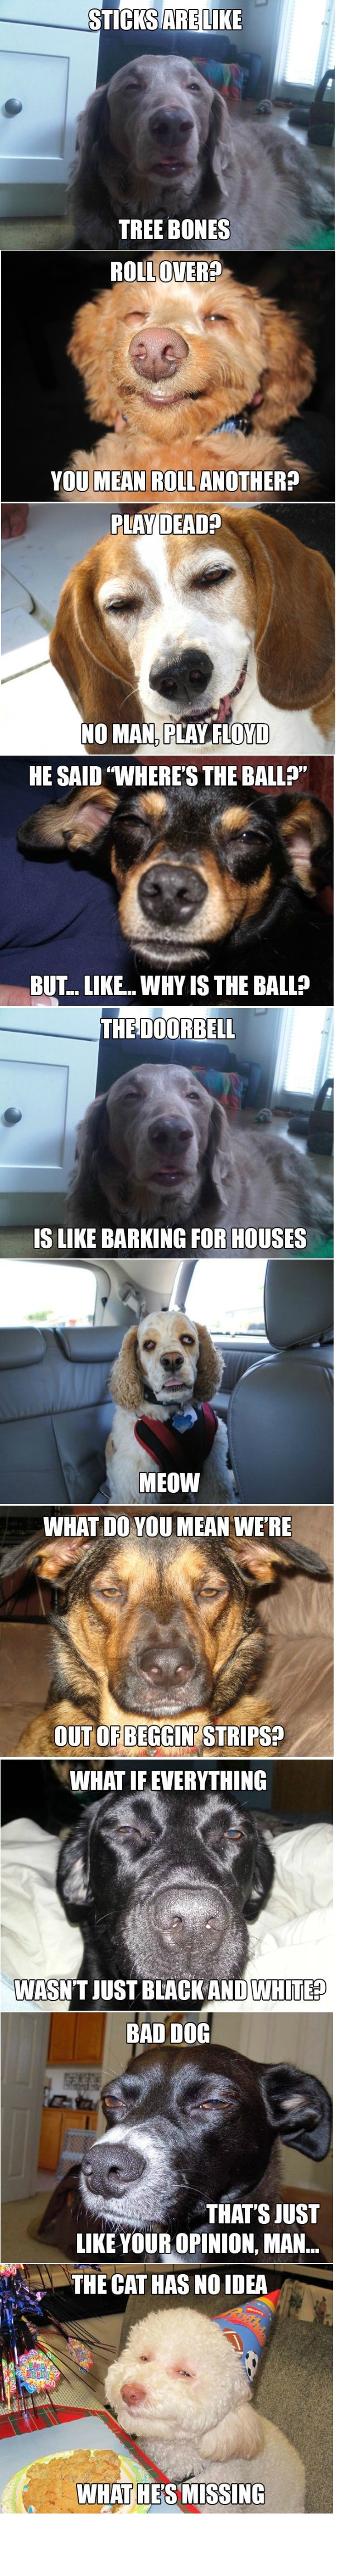 Stoner dogs | image tagged in funny,memes,animals,stoner dog,dogs